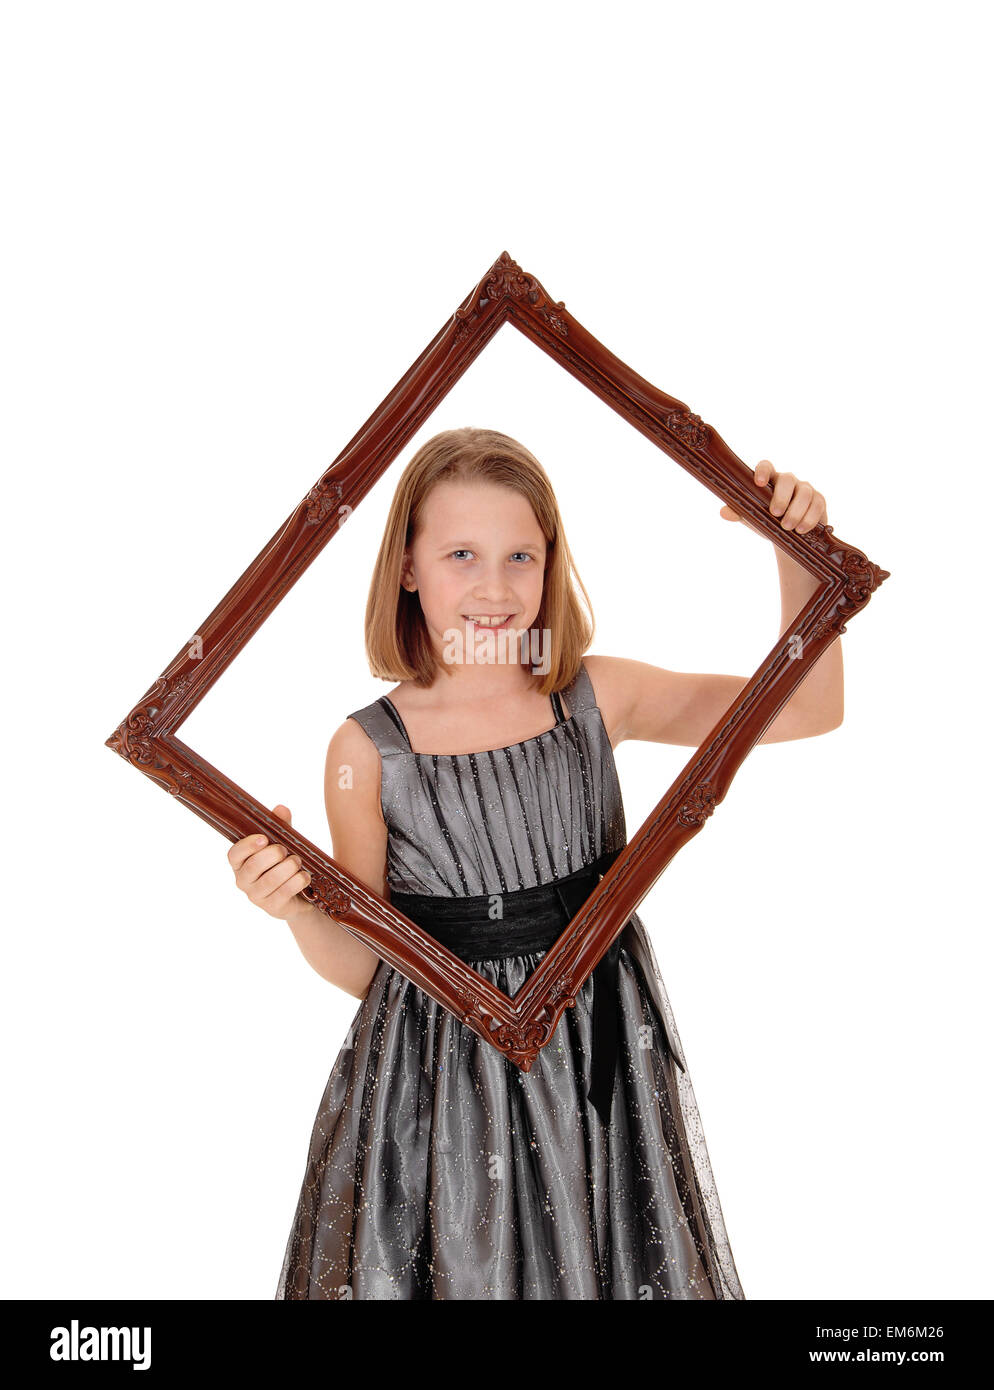 A lovely young girl in a grey dress holding a picture frame in front of her, isolated on white background. Stock Photo